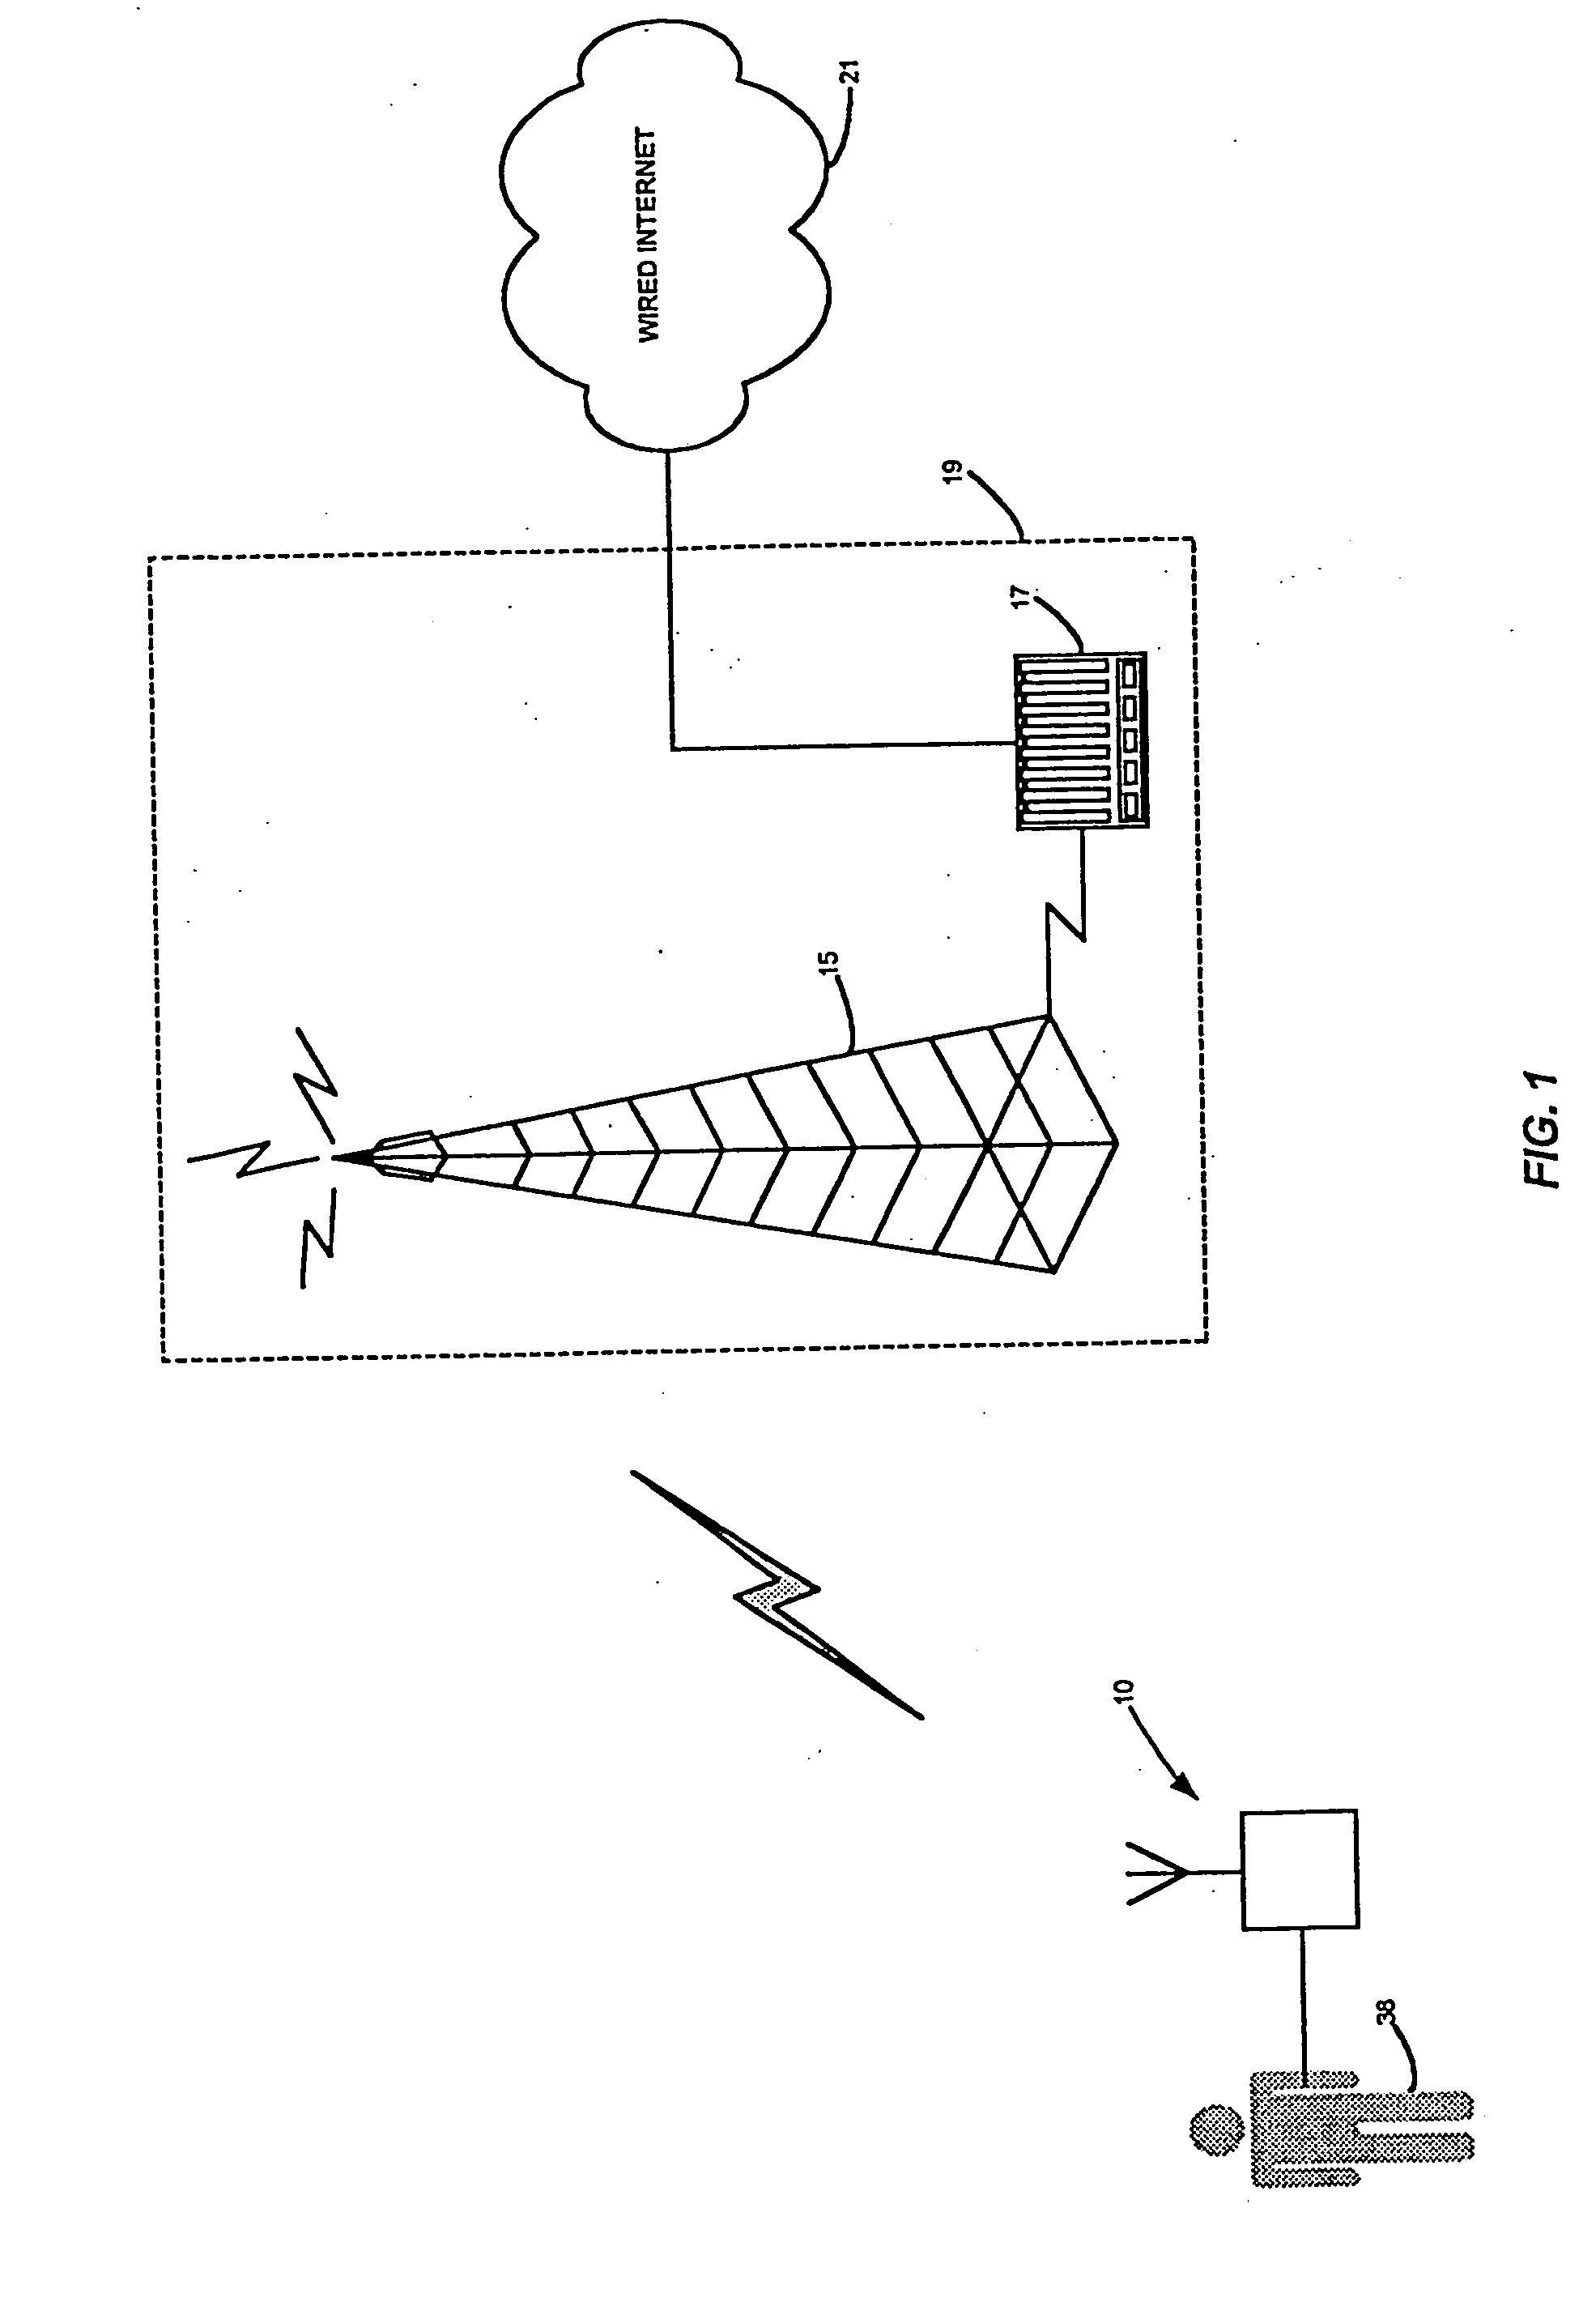 Method and apparatus for health and disease management combining patient data monitoring with wireless Internet connectivity